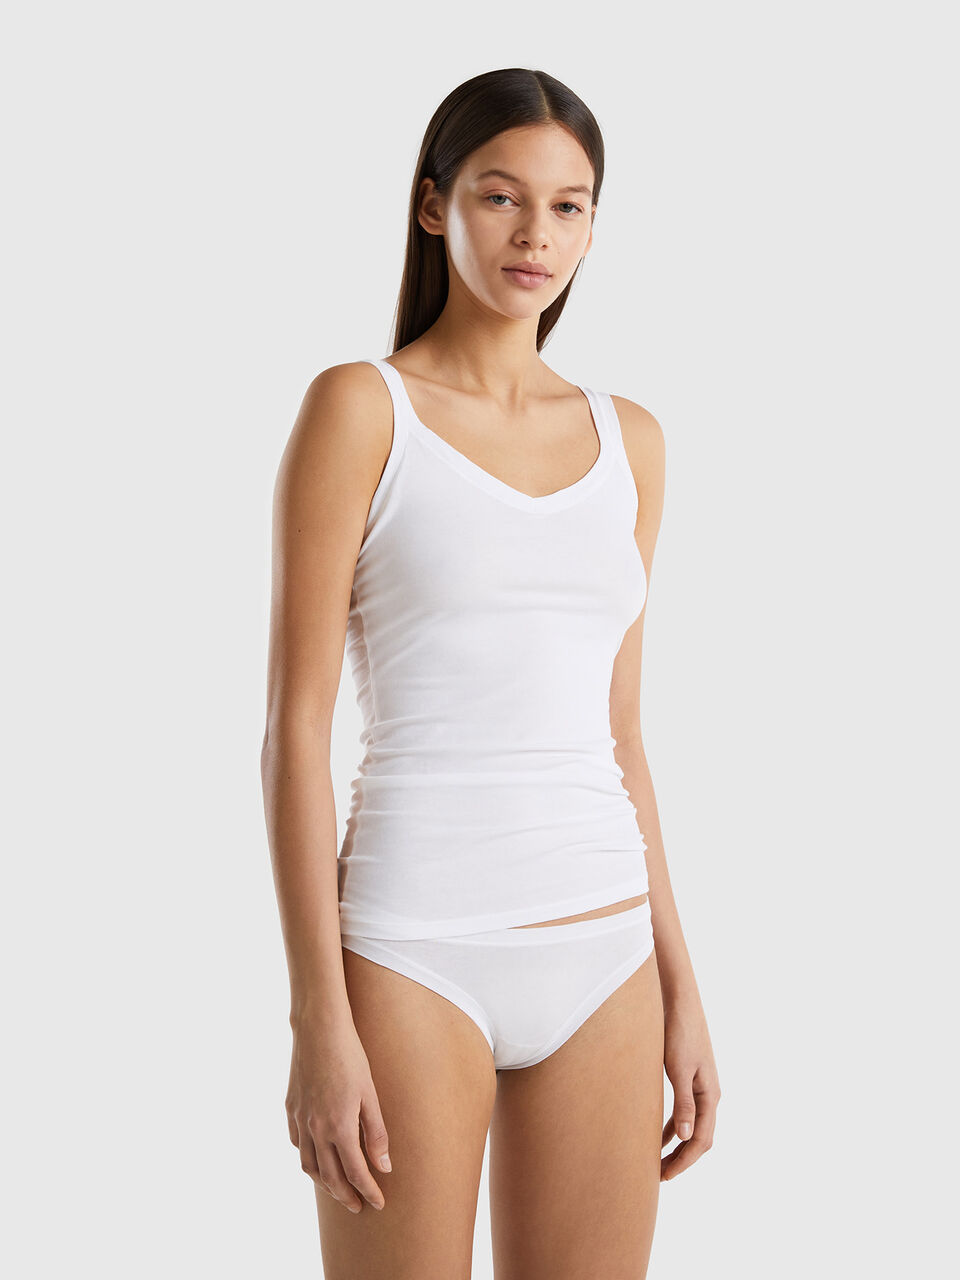 White singlet for women with round neck made of organic cotton and